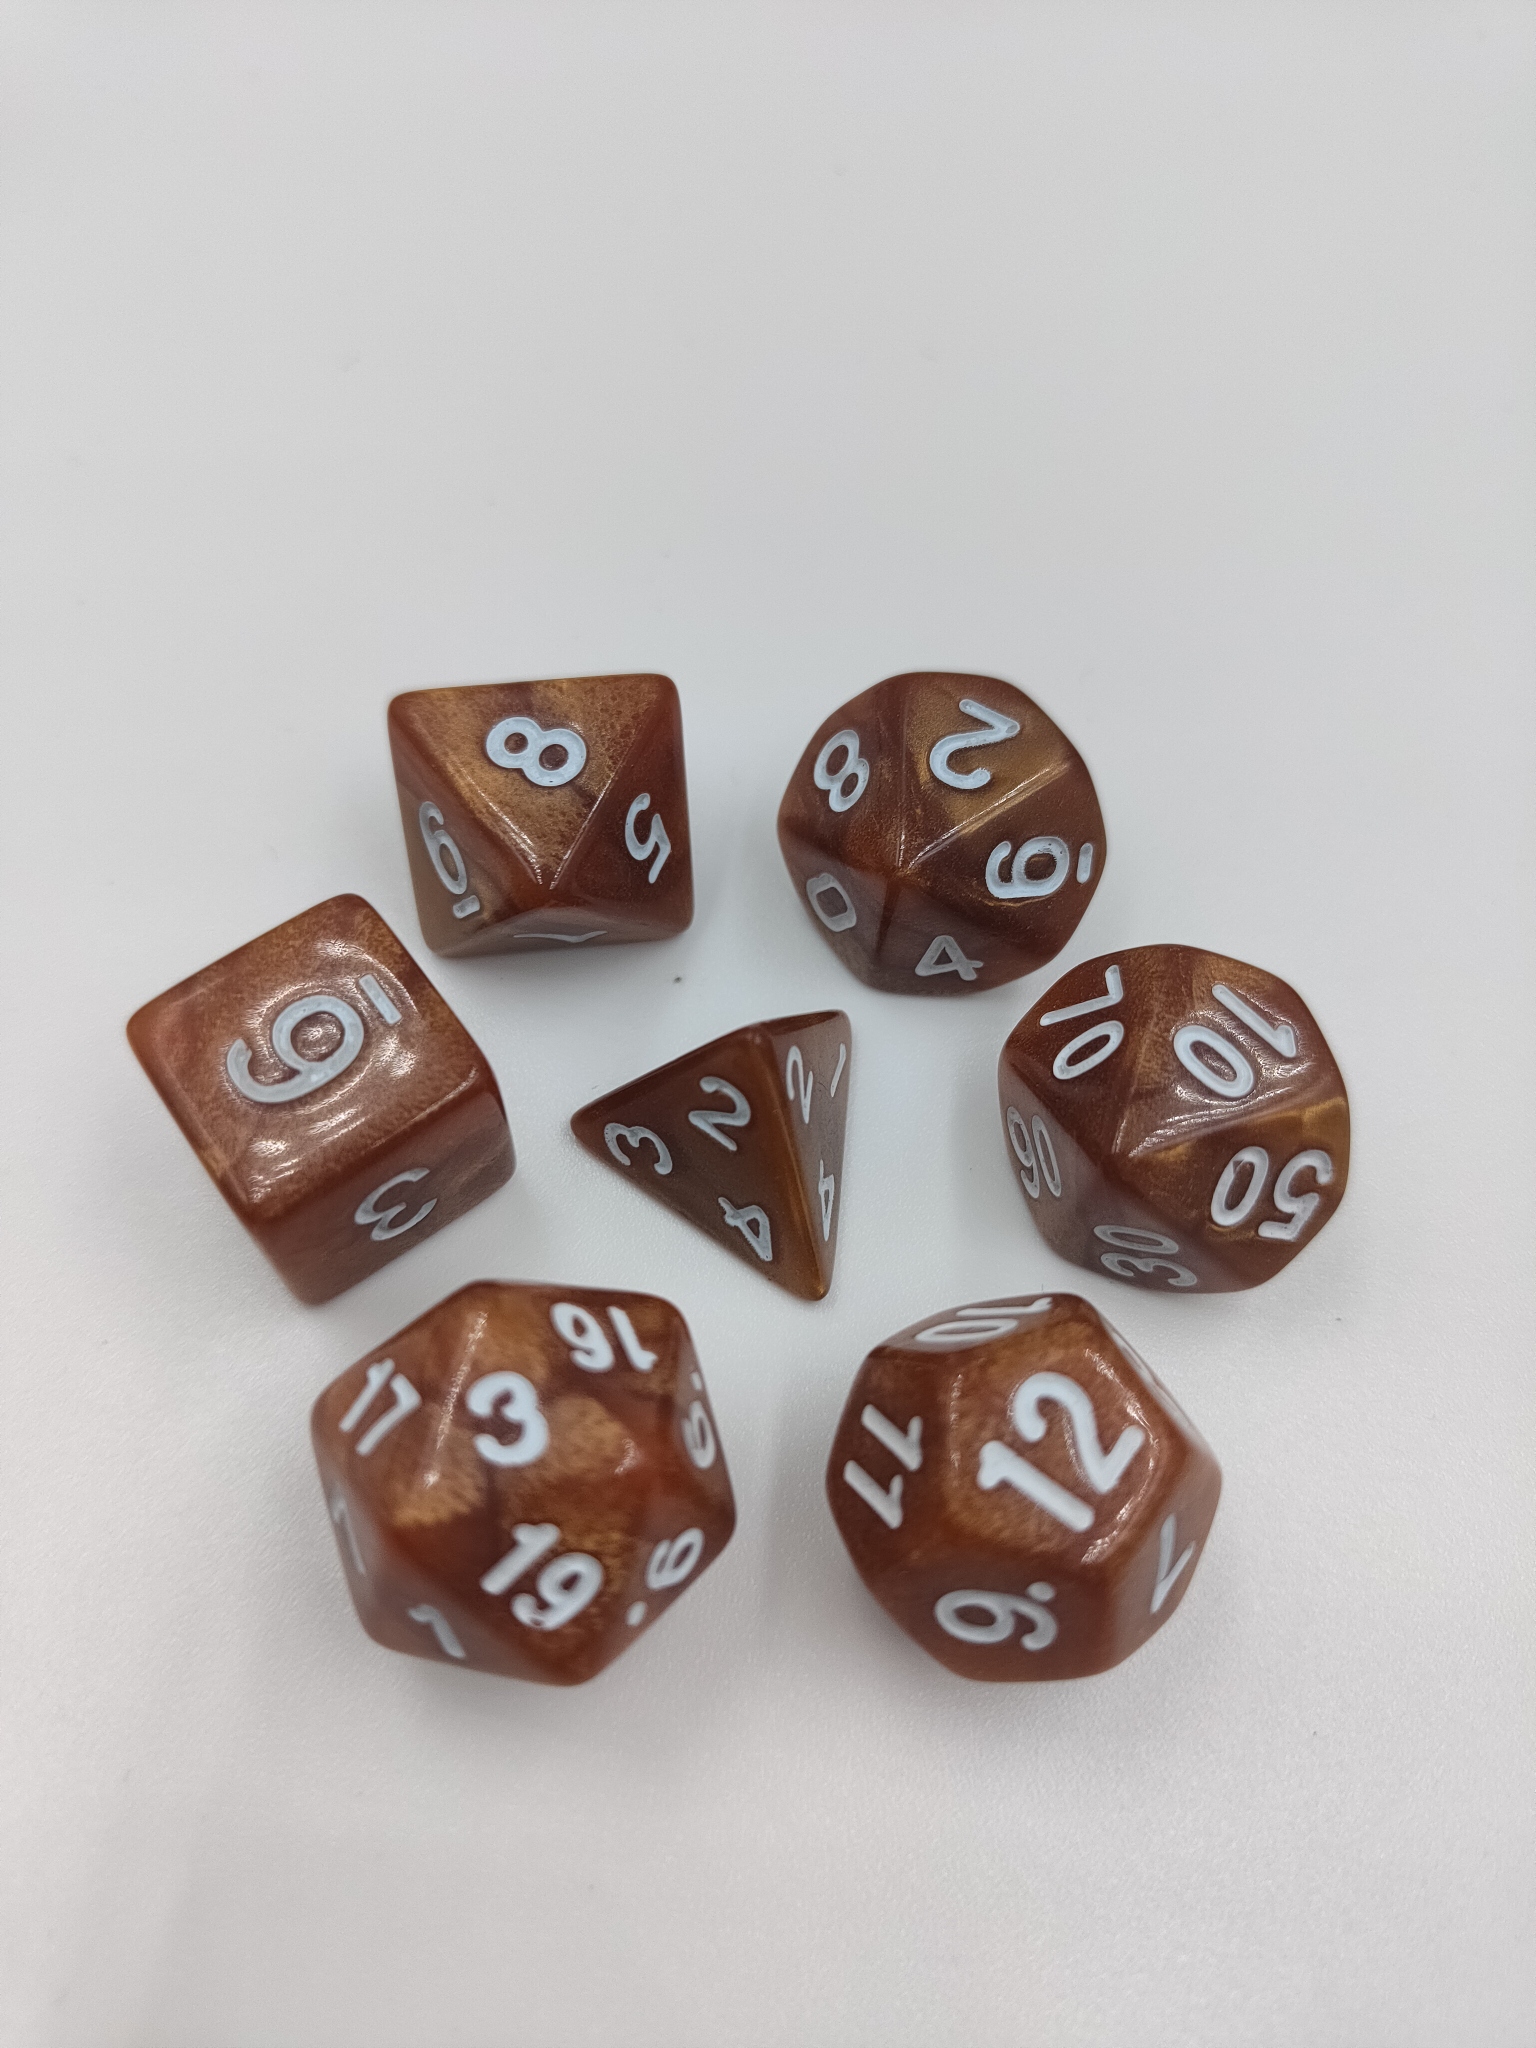 Spot supply of multi-sided dice (4, 6, 8, 10, 12, 20)